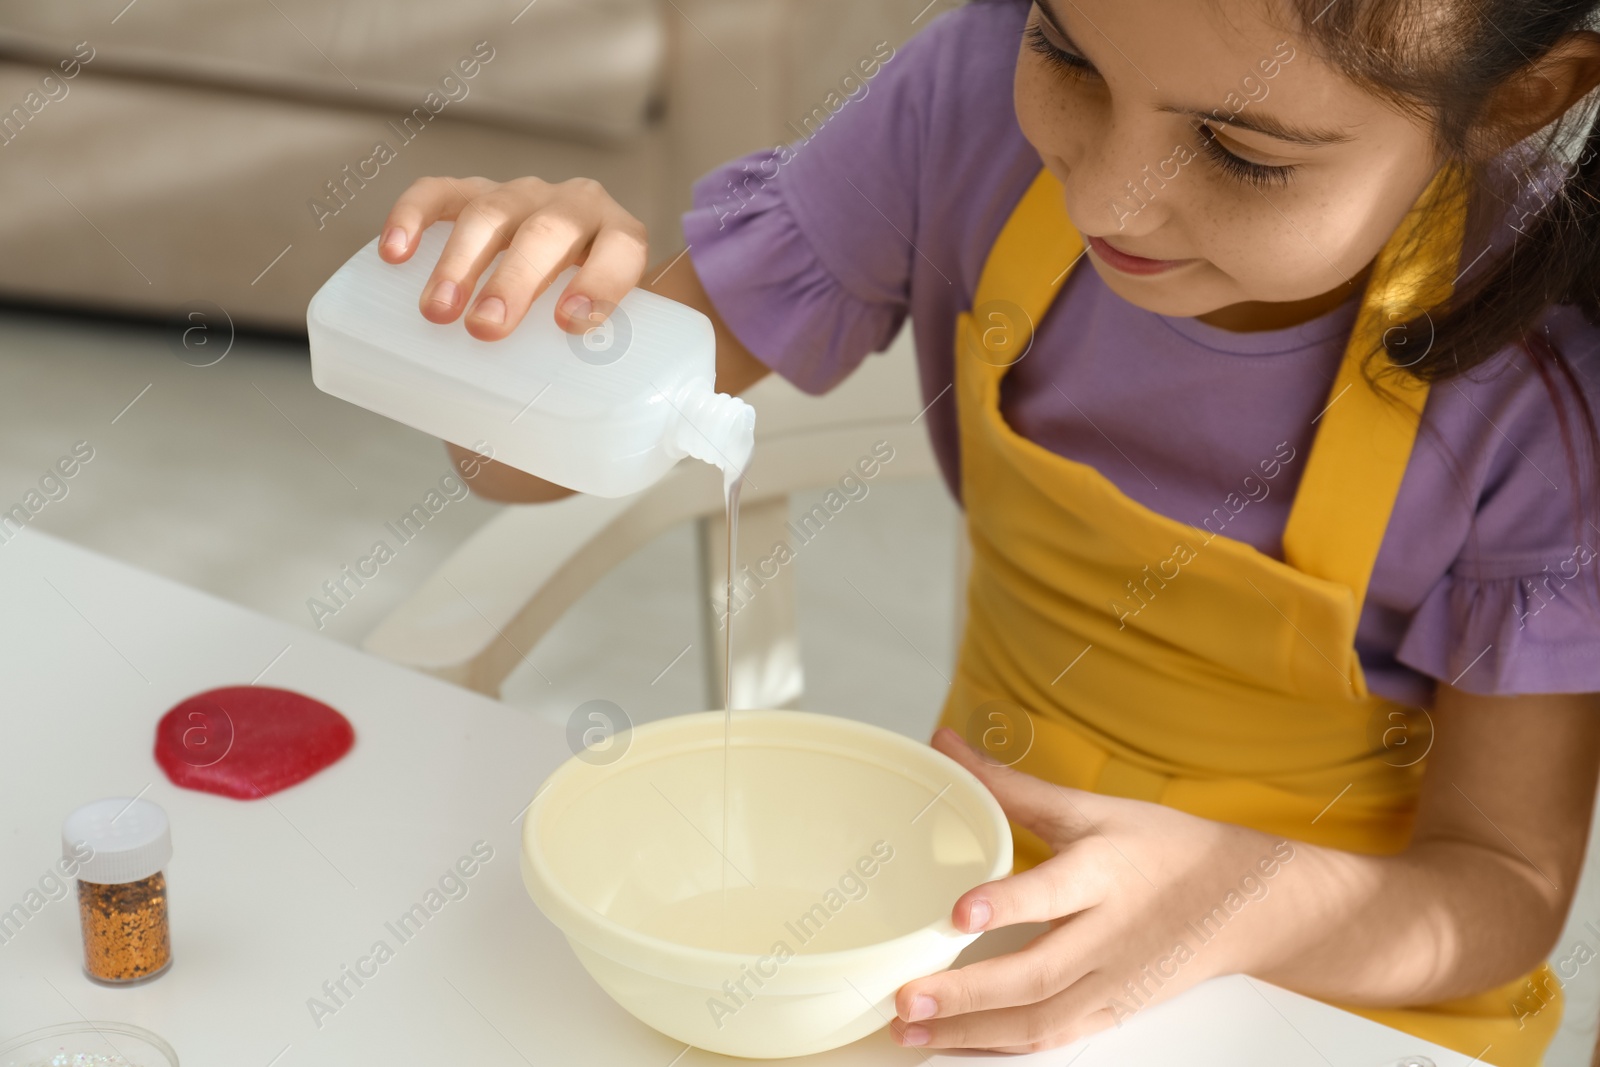 Photo of Cute little girl pouring glue into bowl at table in room. DIY slime toy